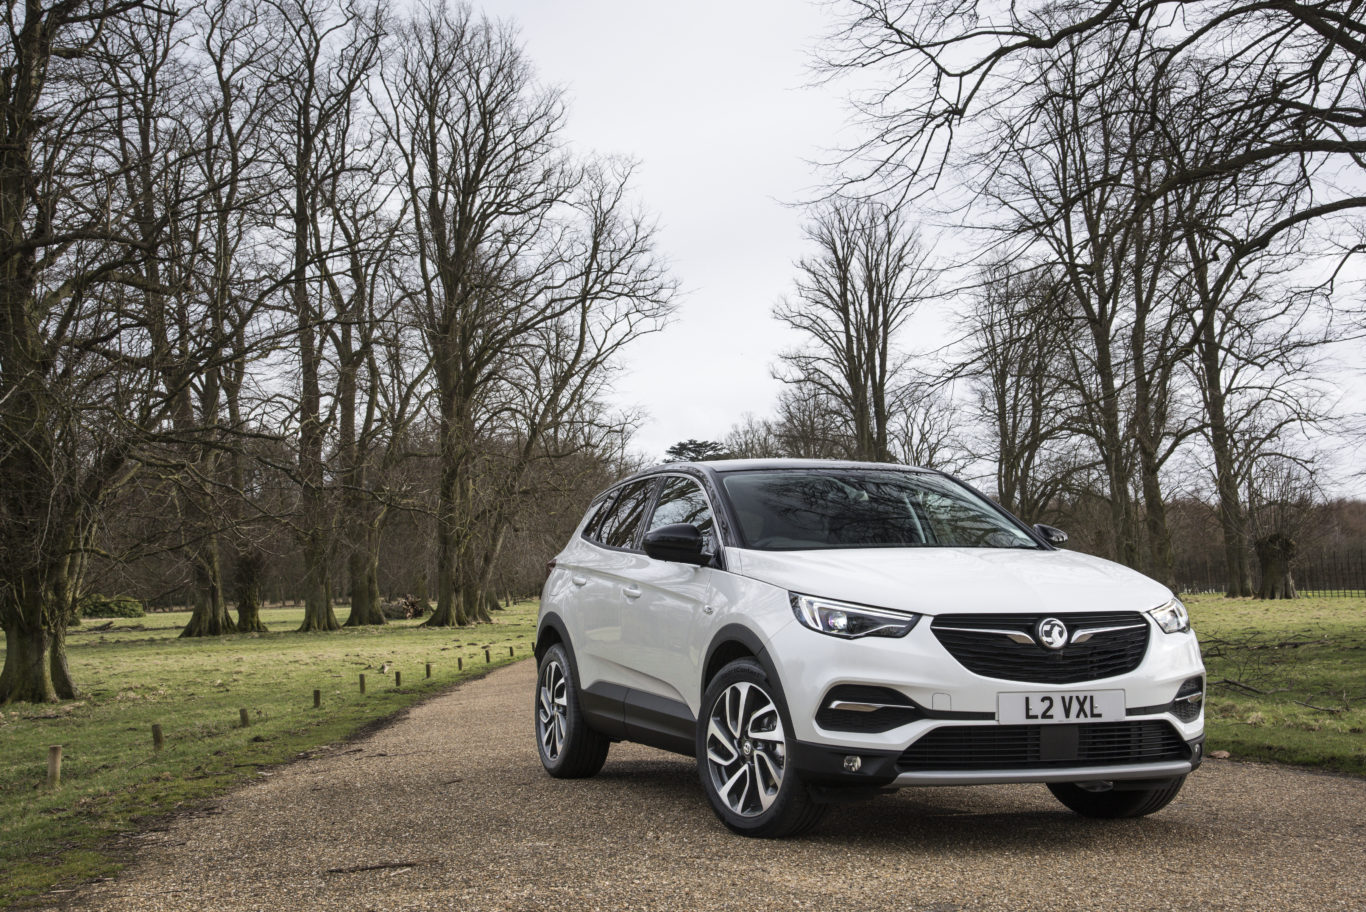 The Vauxhall Grandland X is another entry into the busy SUV segment